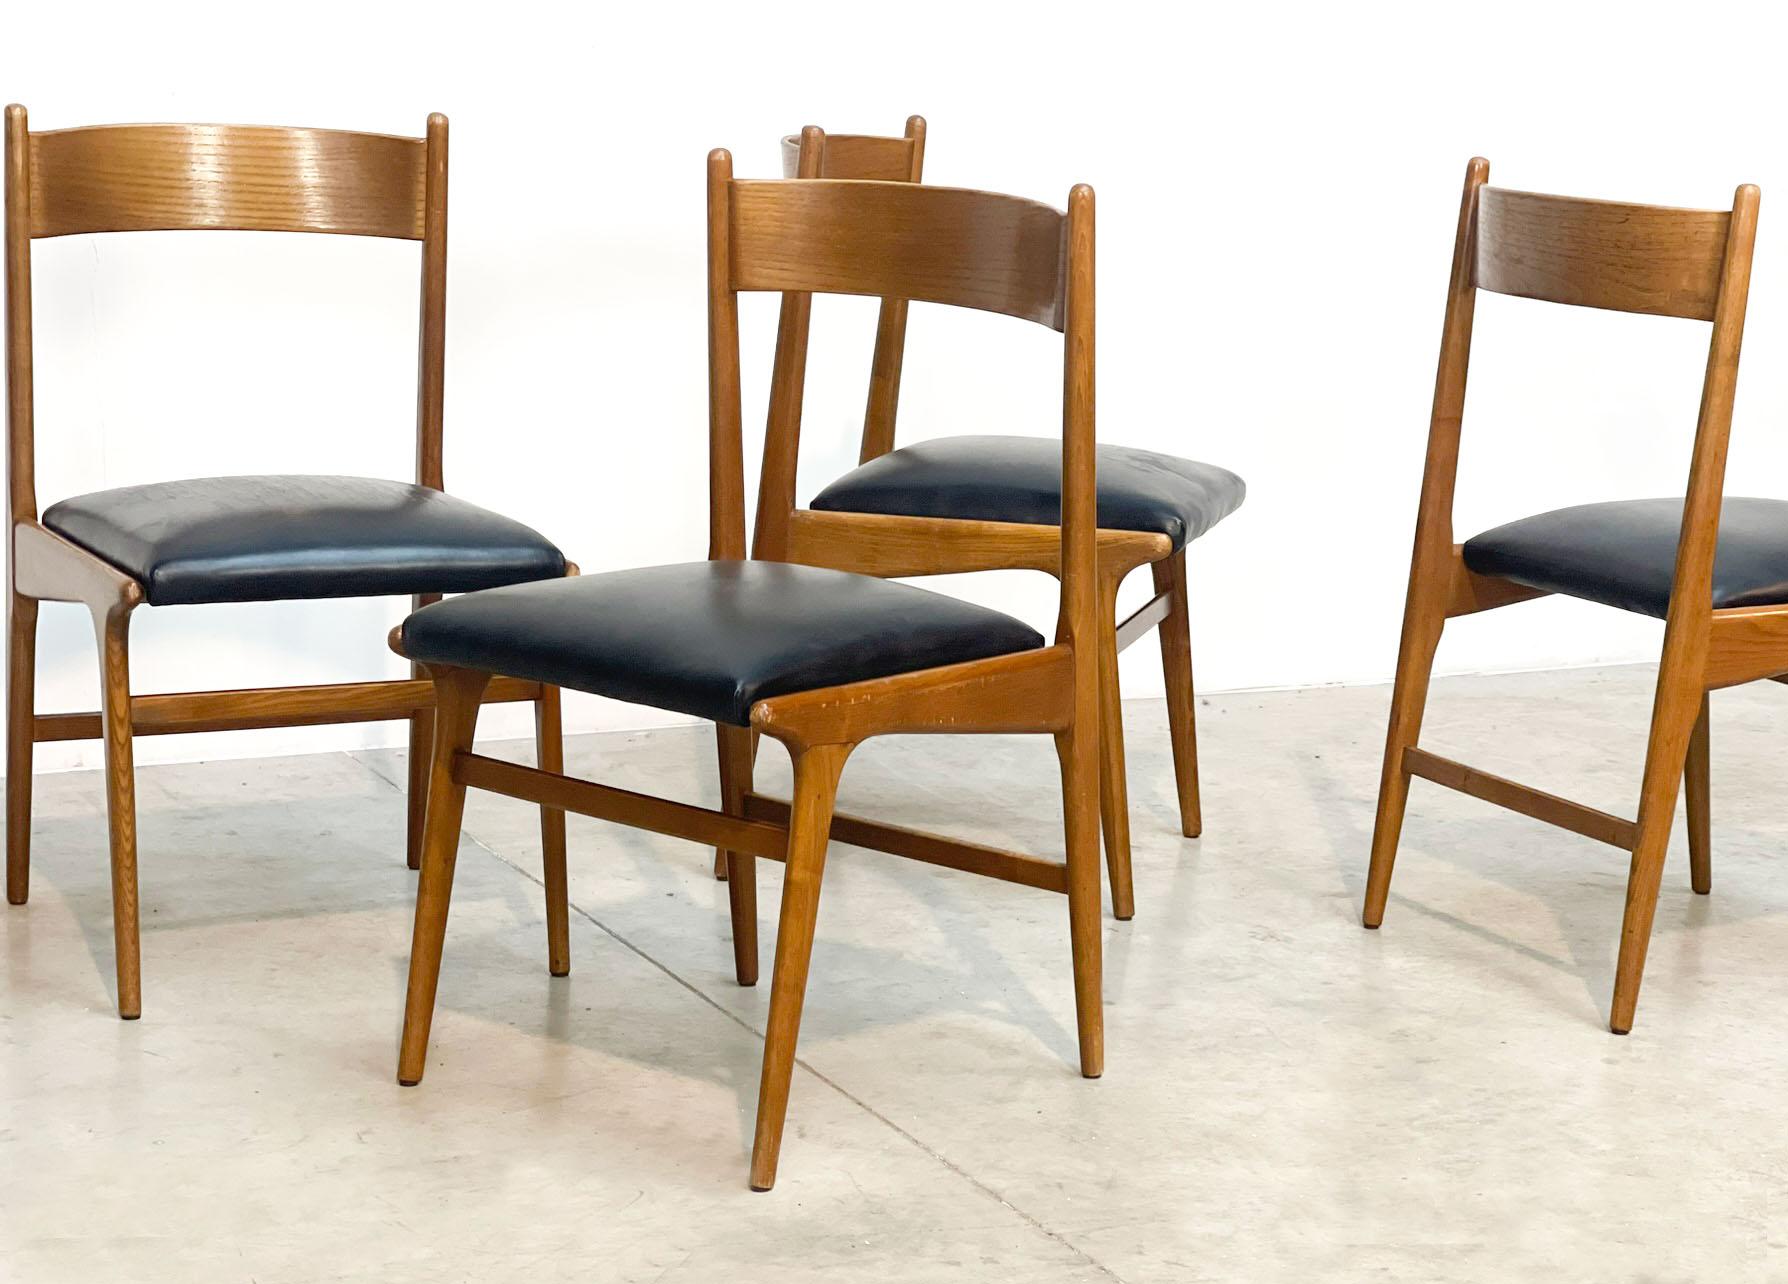 Elegant mid century italian dining chairs with wooden frames and black leatherette upholstery.

Good condition

1960s - Italy

Dimensions:
Height: 74cm/29.13